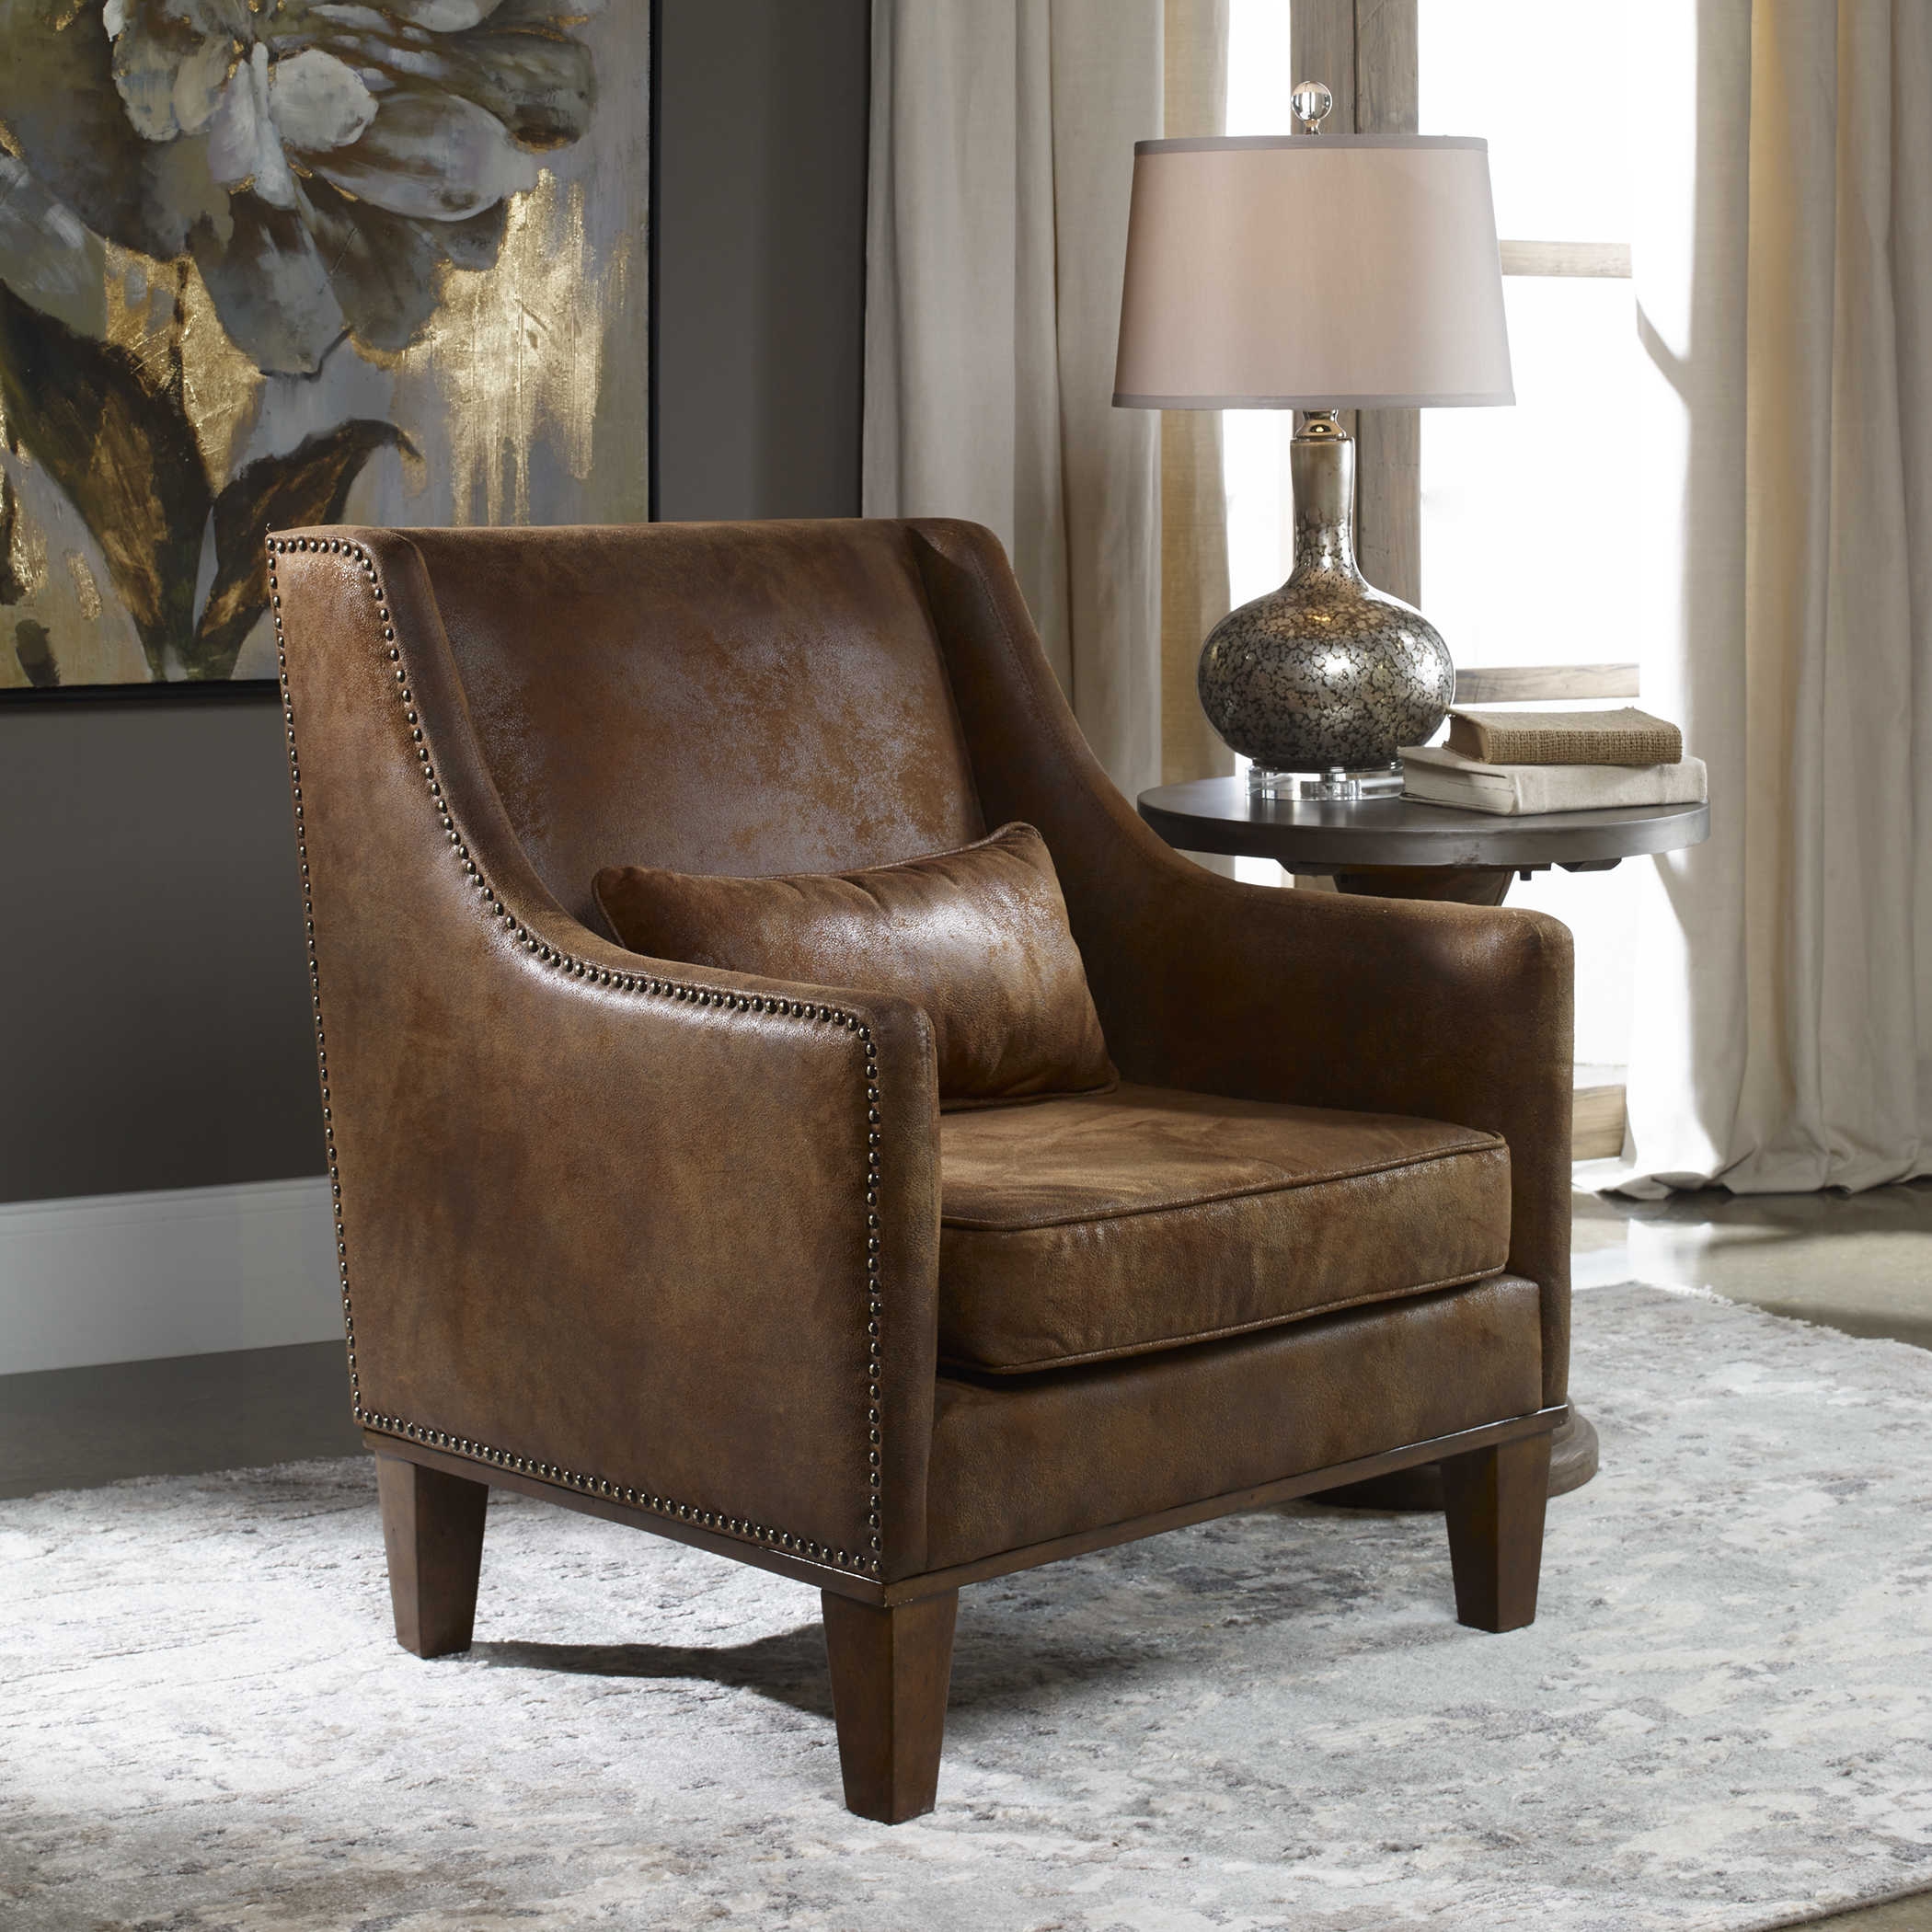 Clay Leather Armchair - Image 1